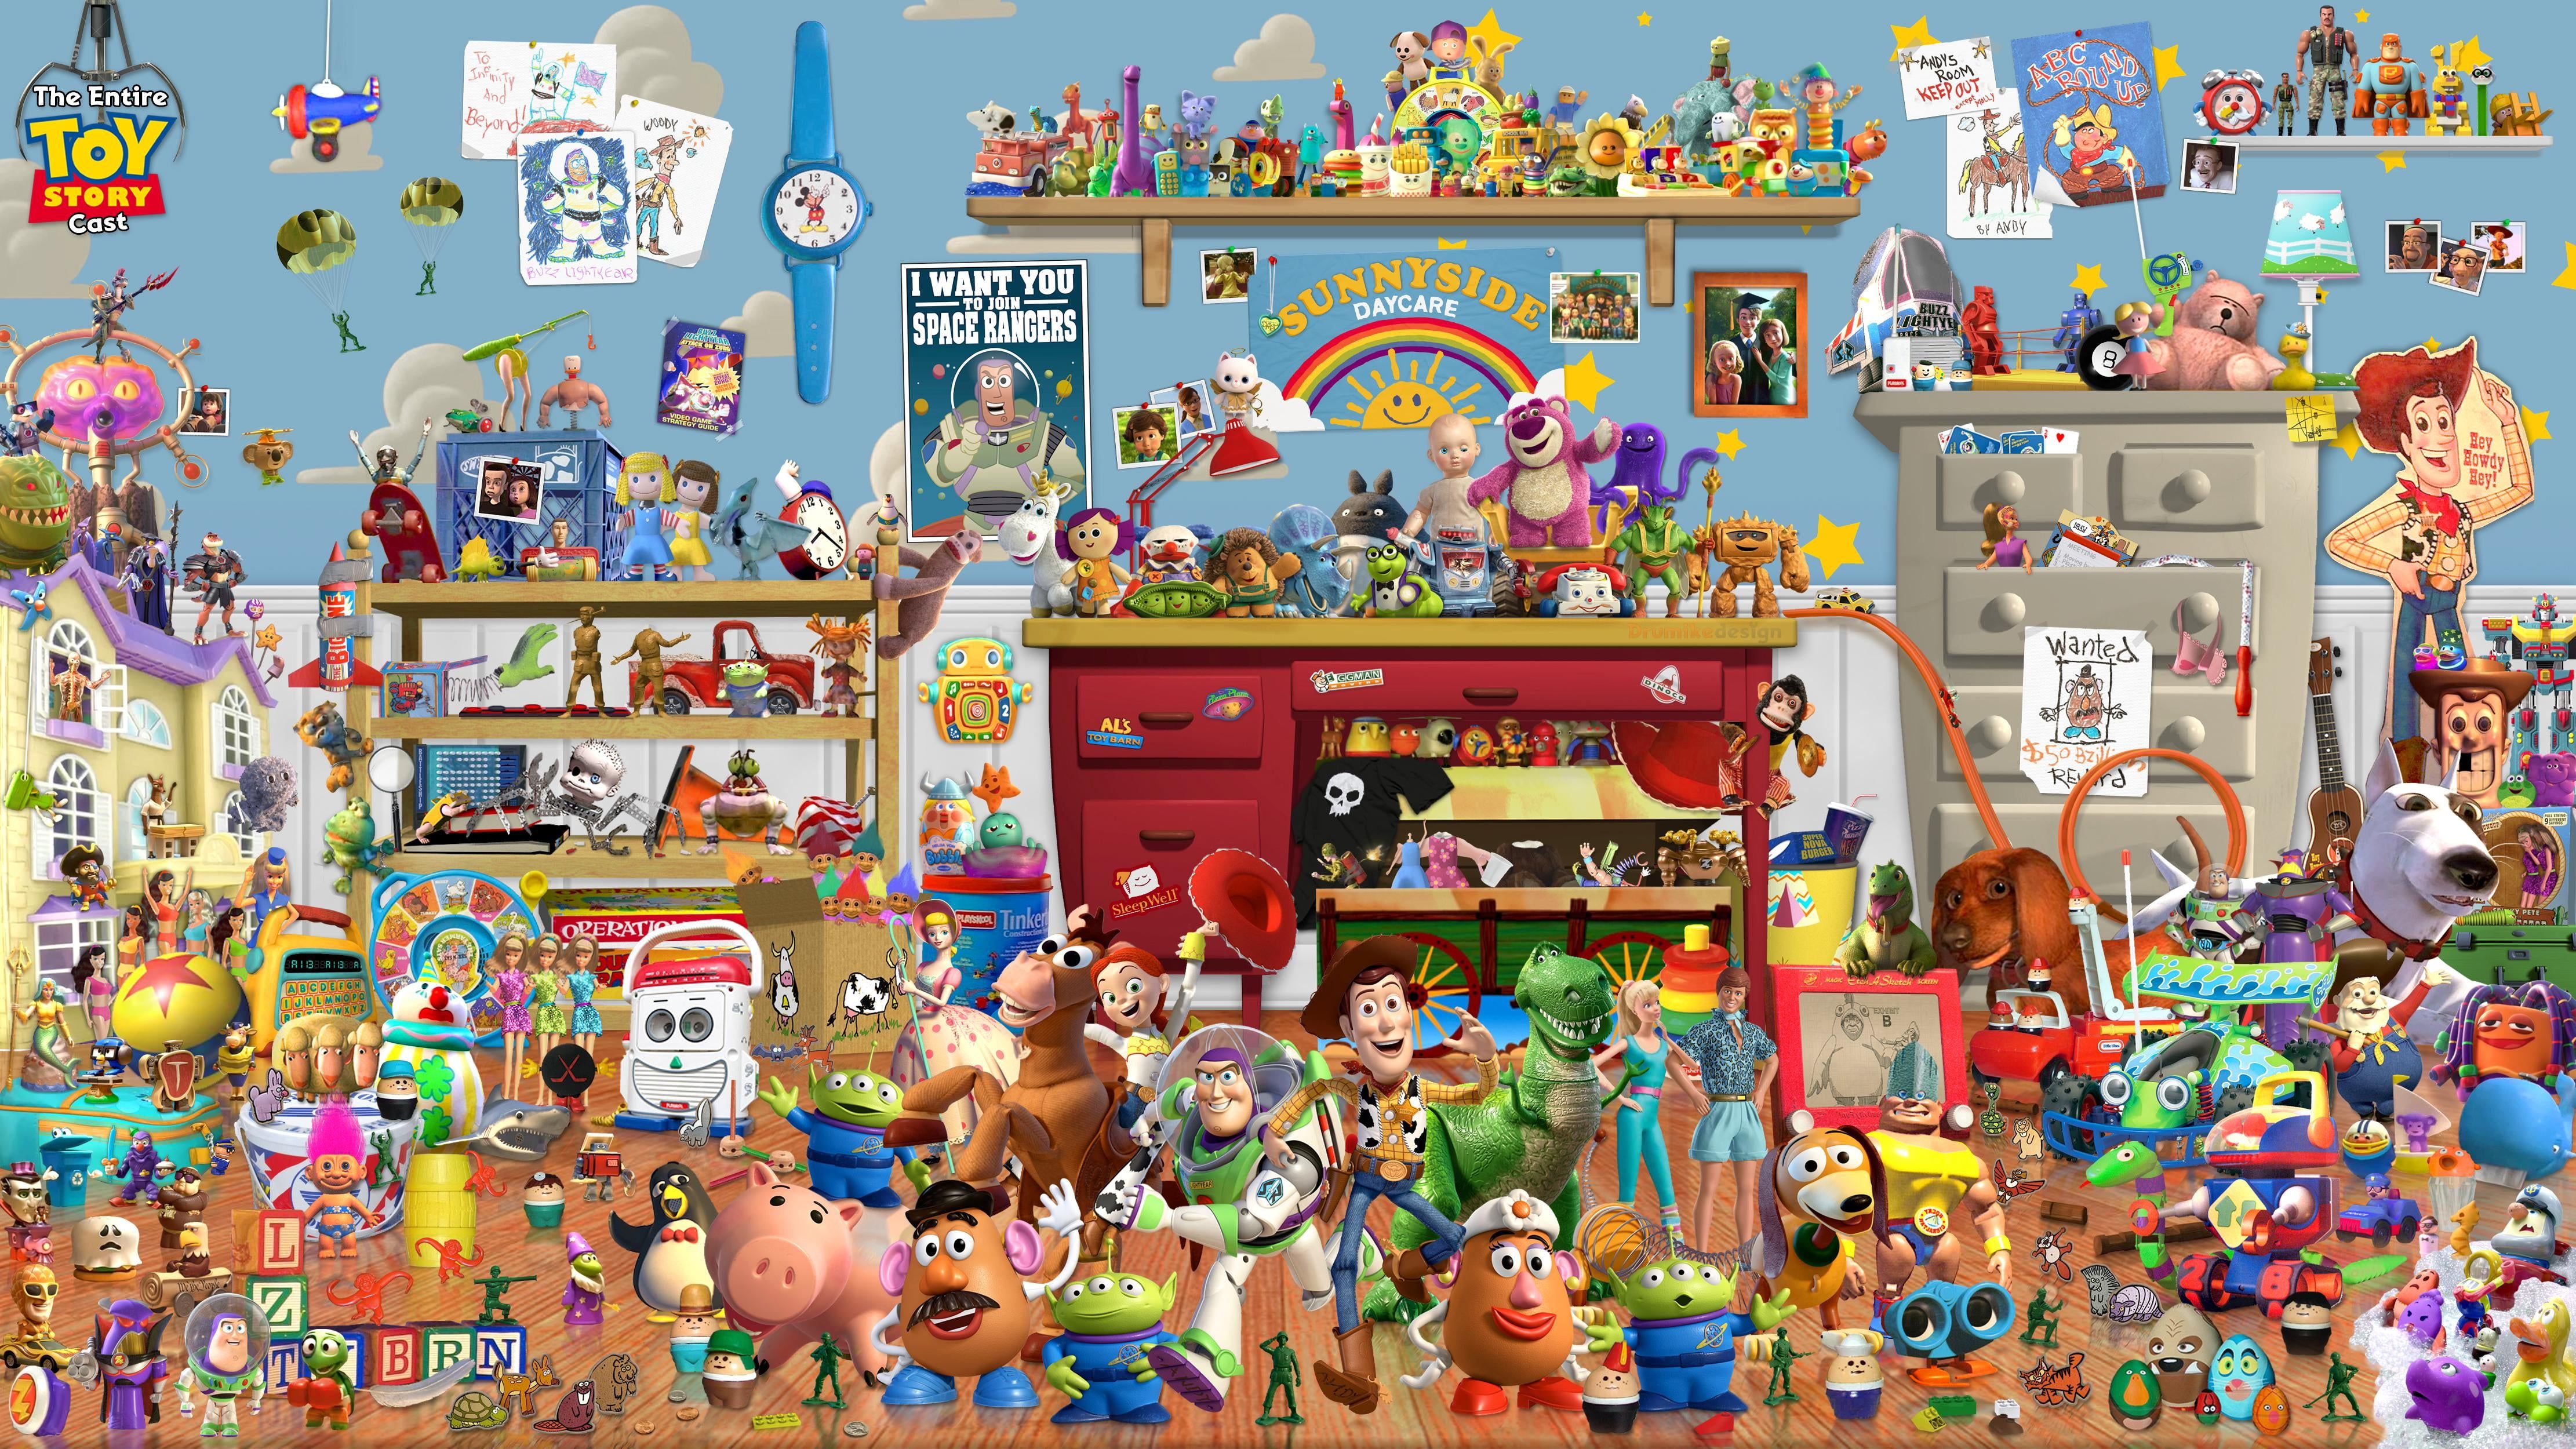 all Toy Story Pixar Characters [4444 x 2500] (good luck trying to find desktop icons after making this your wallpaper)